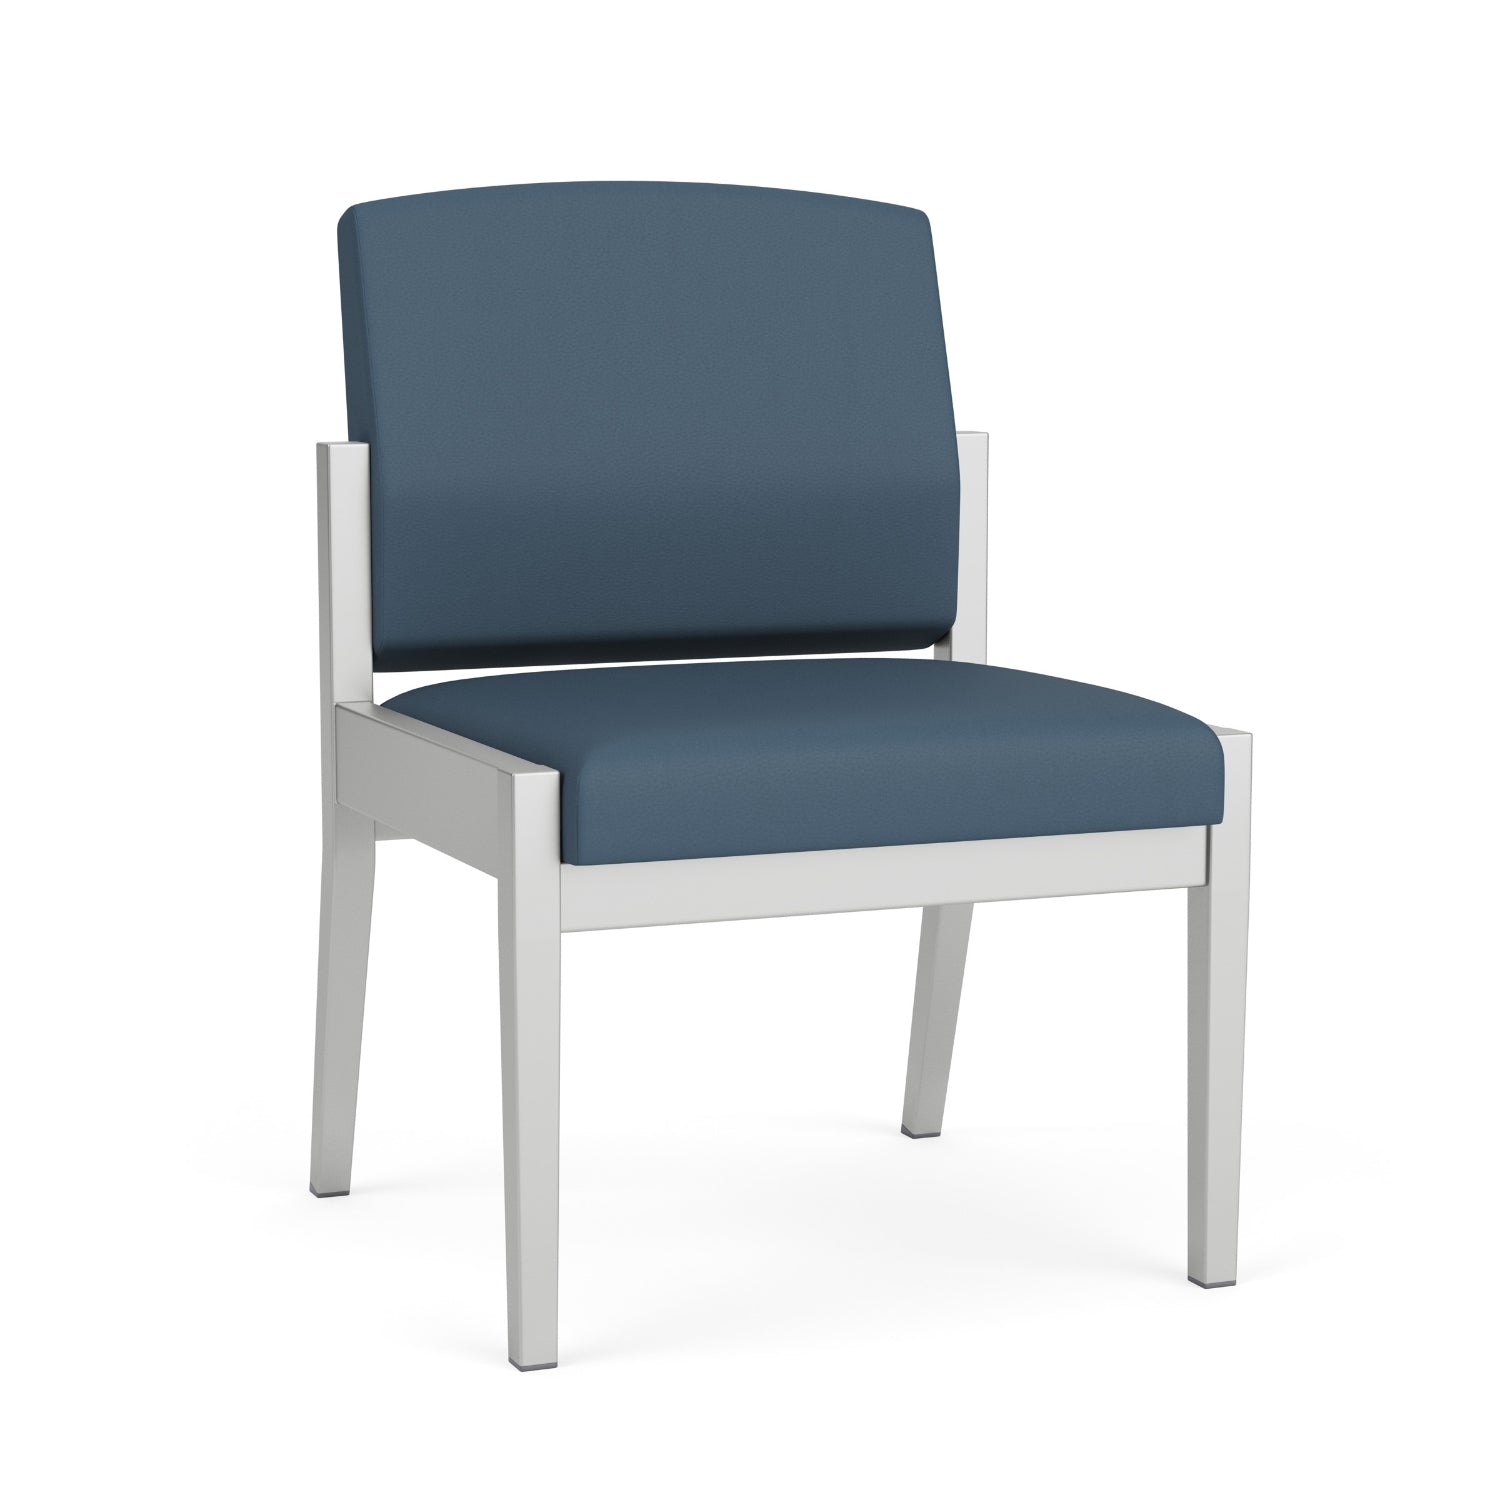 Amherst Steel Collection Reception Seating, Armless Guest Chair, Standard Vinyl Upholstery, FREE SHIPPING